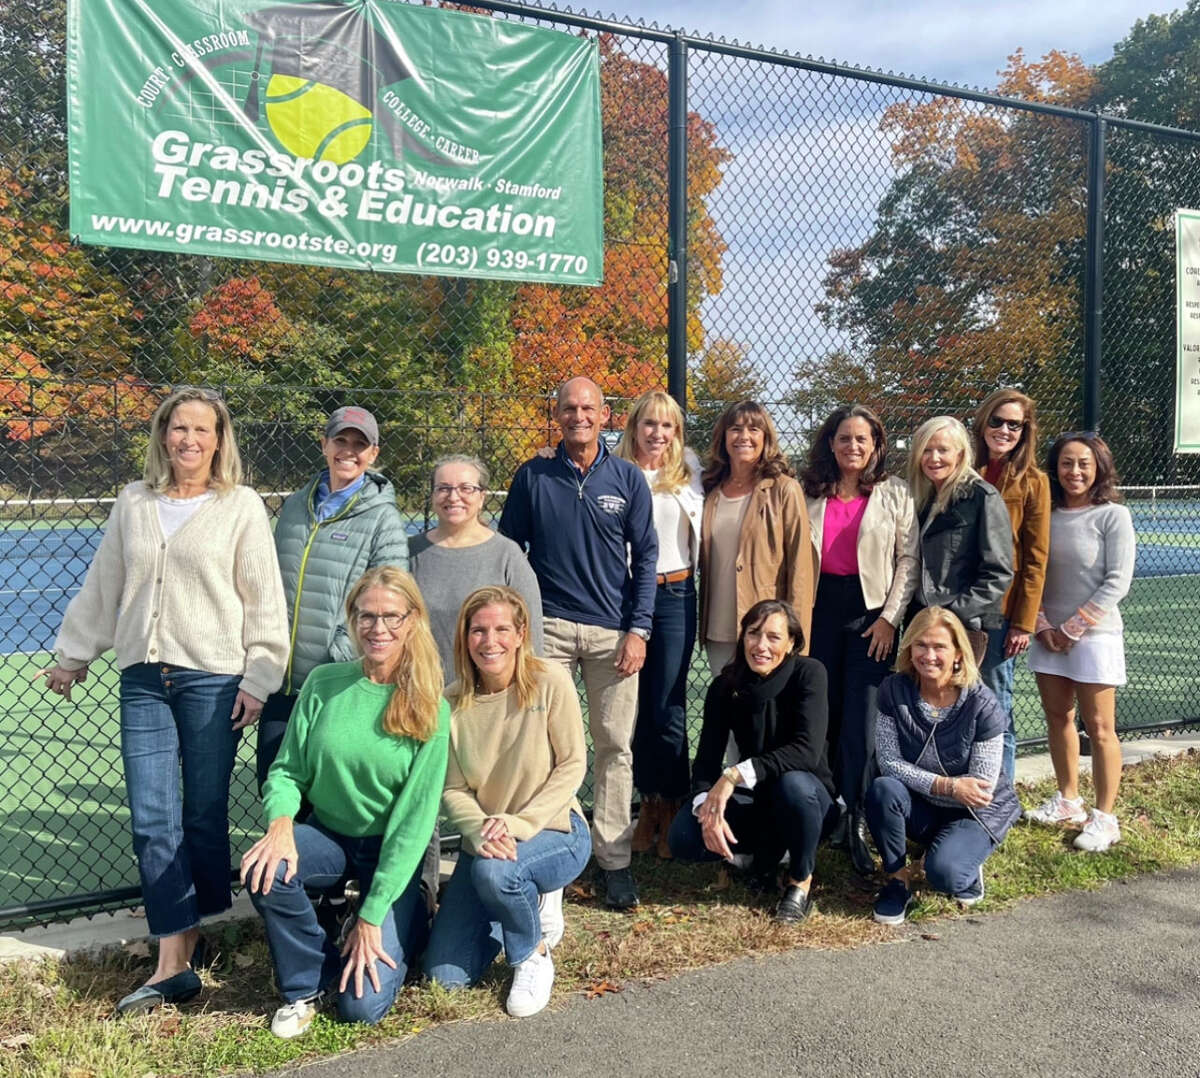 A Grand Slam benefit fundraiser will be held April 1 at Wee Burn Country Club in Darien to benefit the Norwalk/Stamford Grassroots Tennis and Education Program. Many of the committee members planning the event gather along with Co-Chairs Harlan Stone and Michelle Mauboussin,